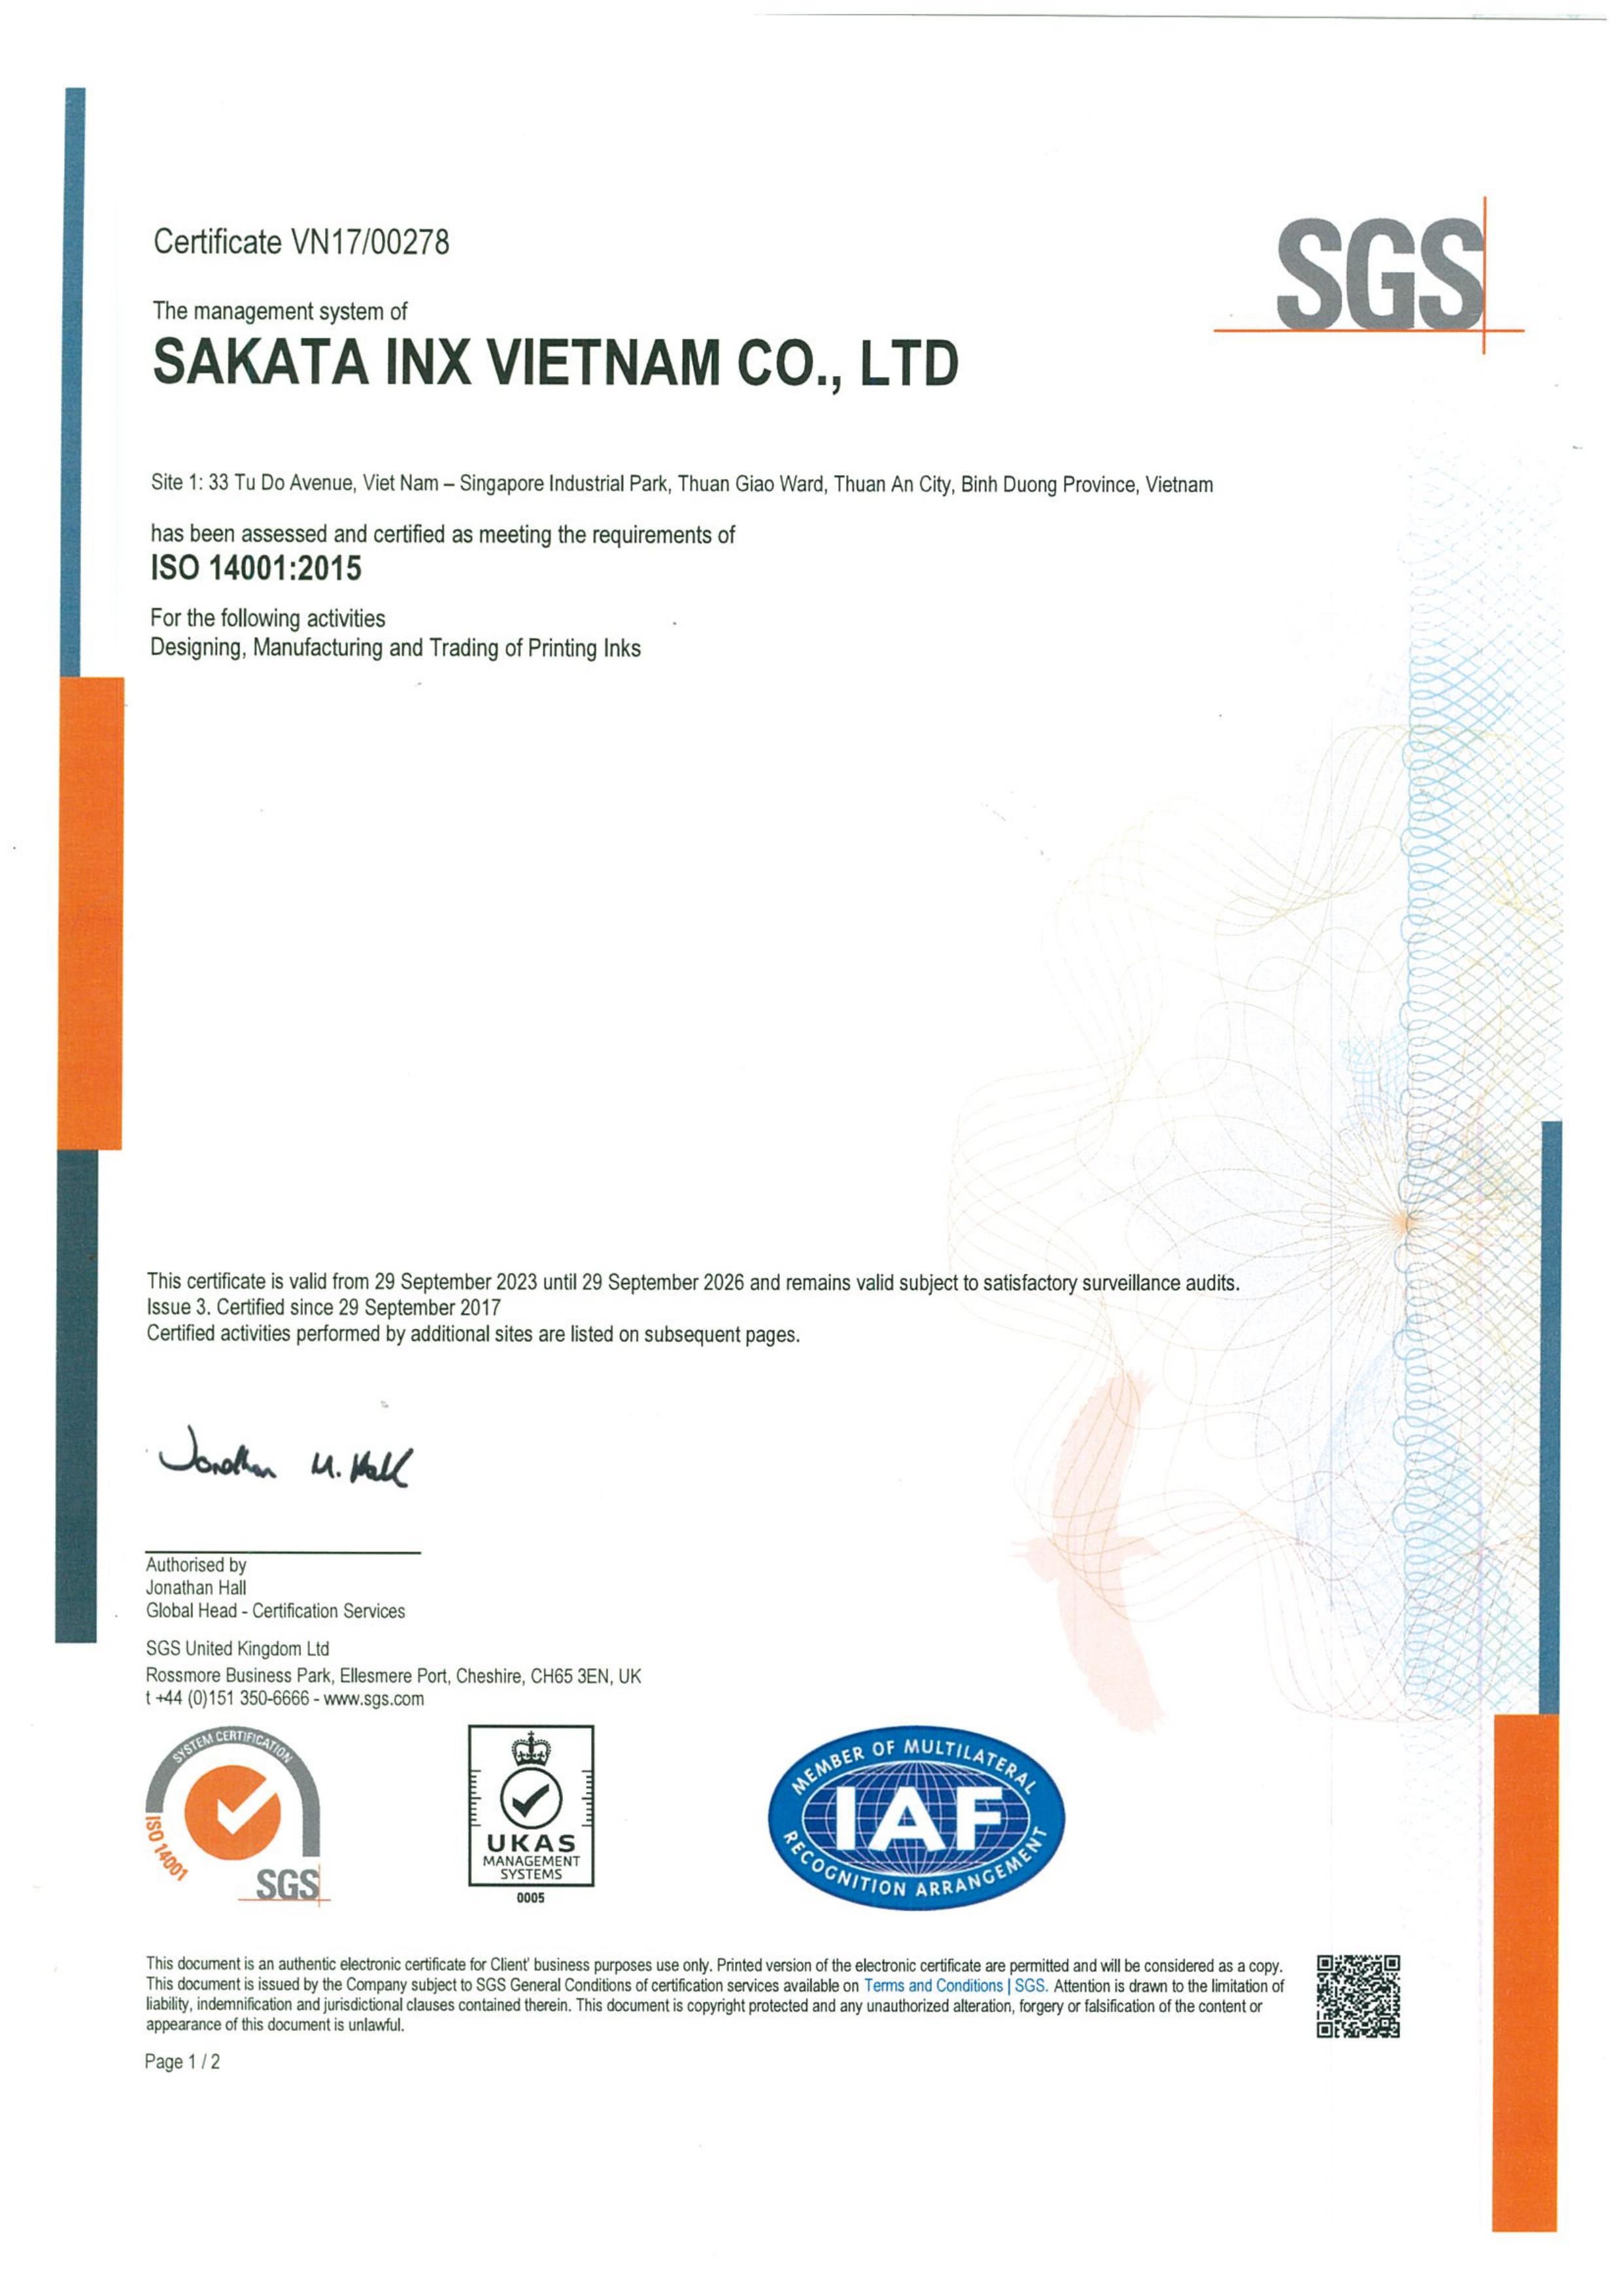 ISO 14001:2015  Certification in Environmental Management Systems Standards.